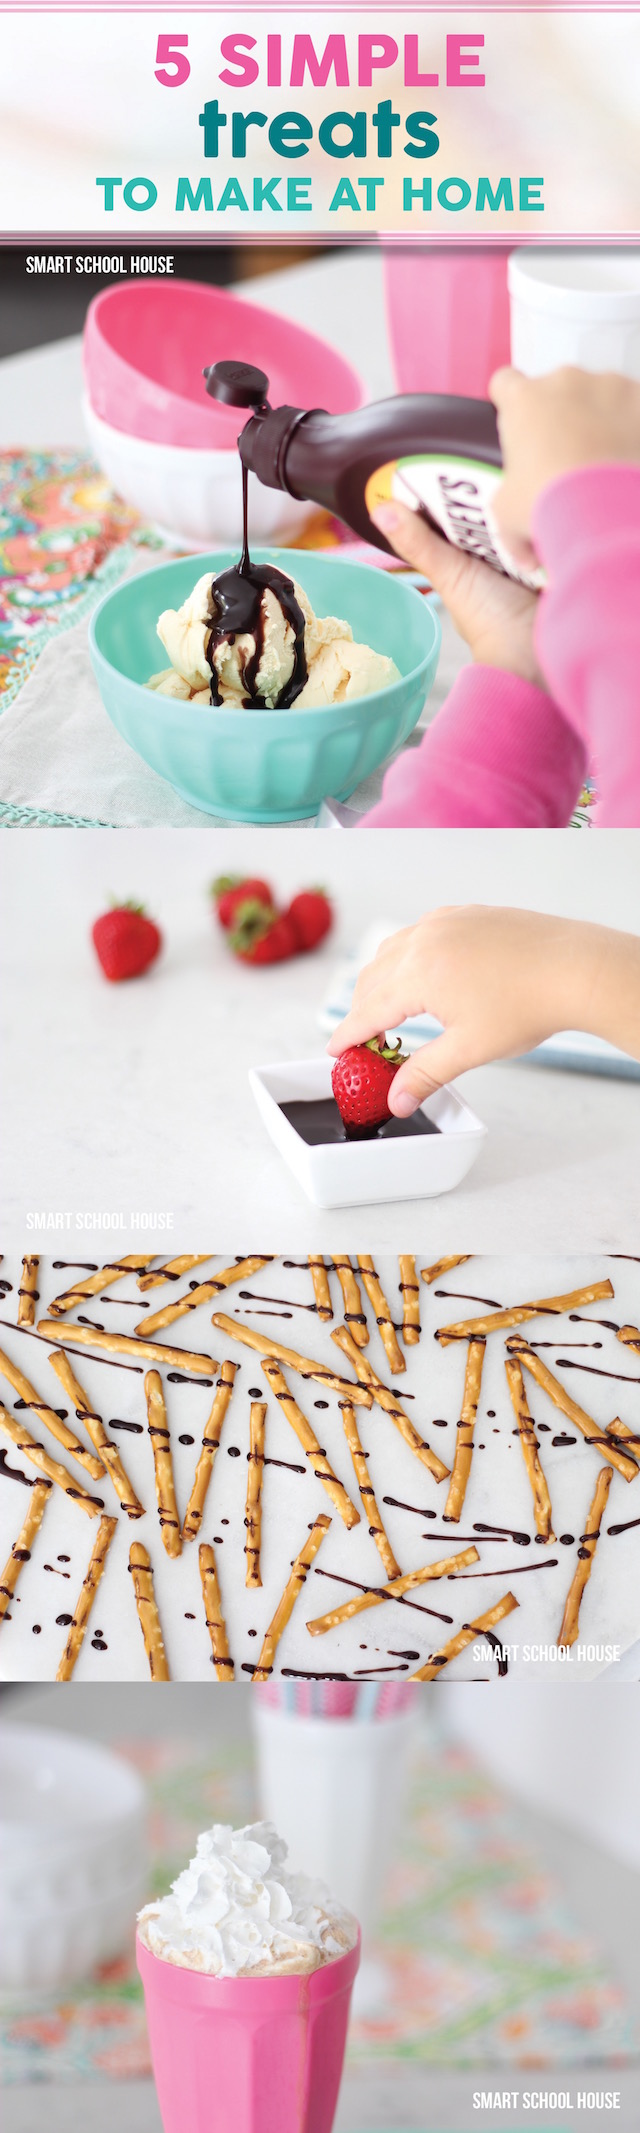 5 simple treats to make at home - easy dessert ideas. Saving this!